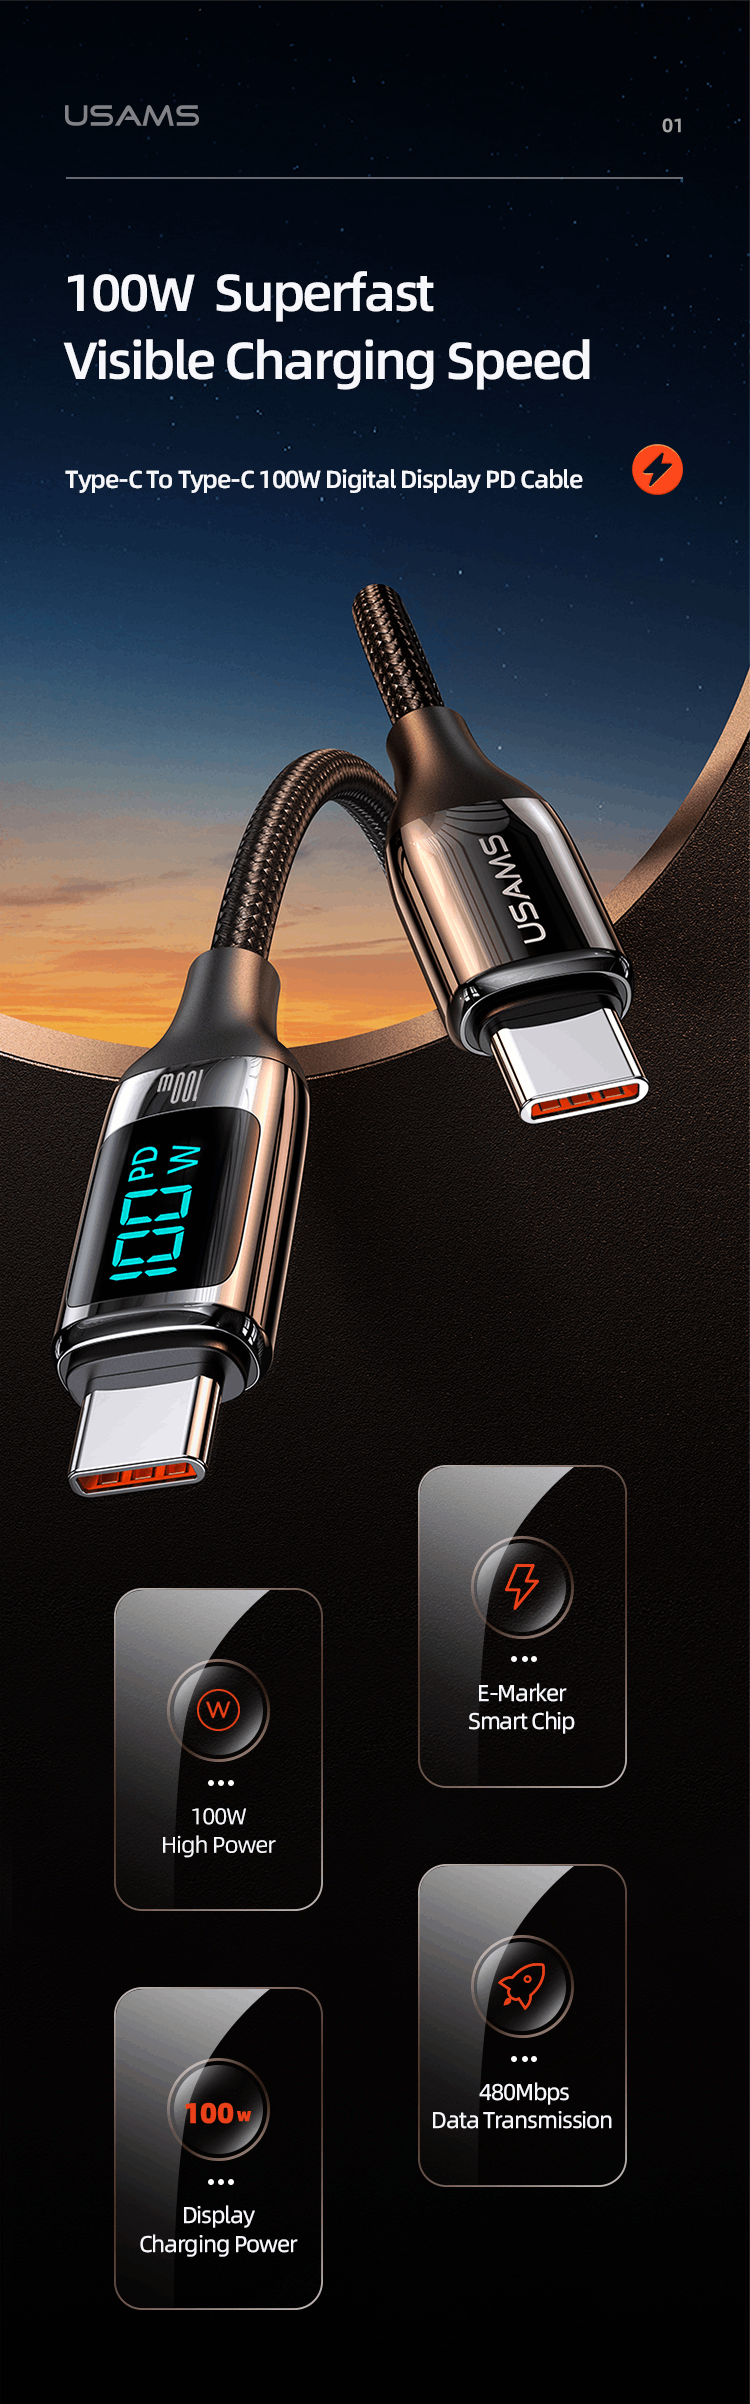 USAMS-U78-100W-USB-C-to-USB-C-PD-Cable-Fast-Charging-Data-Transmission-Cord-Line-2m-long-For-Xiaomi--1941084-1